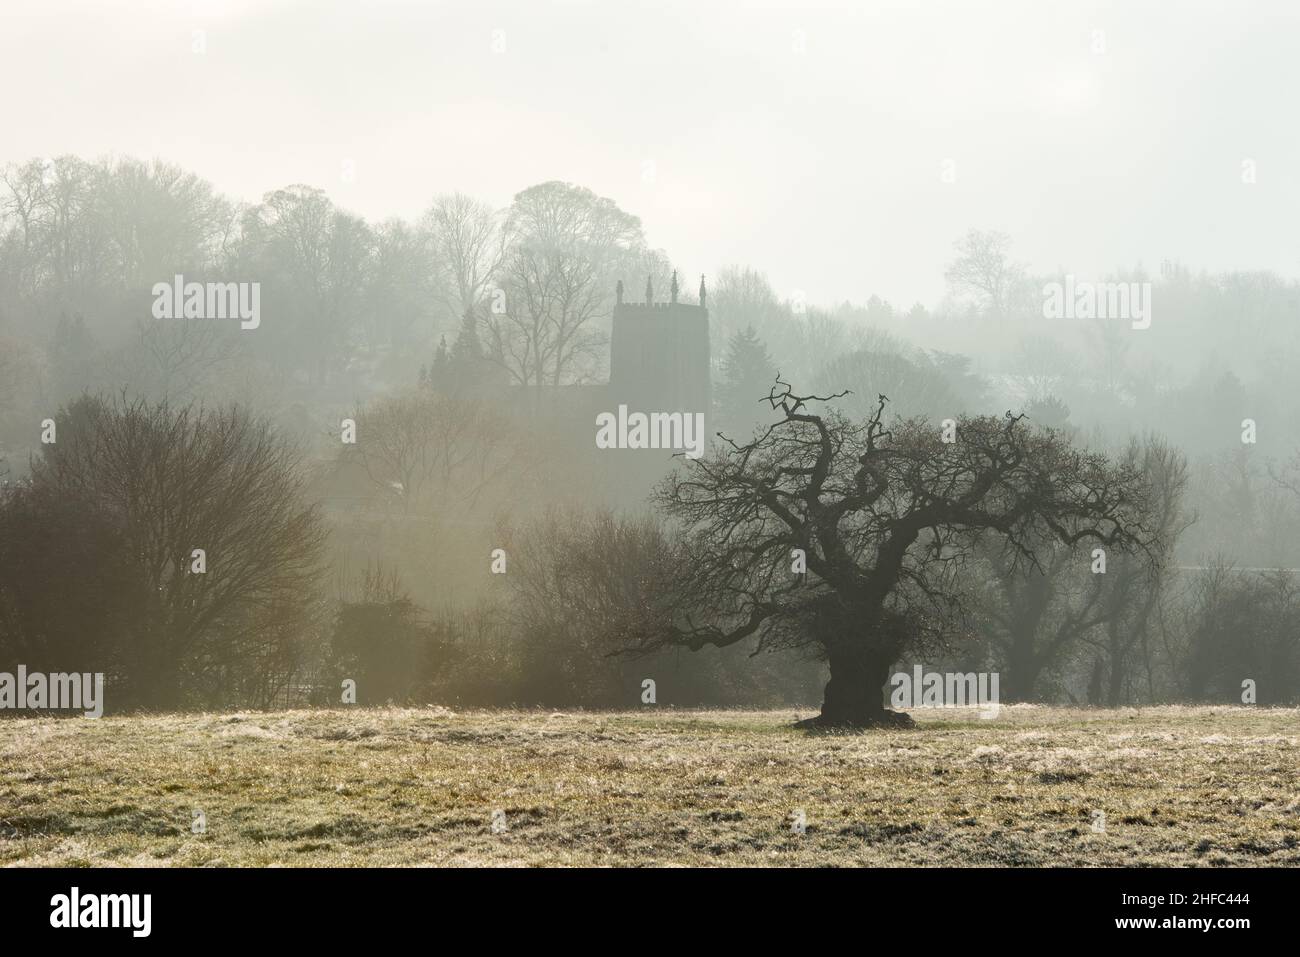 Woolsthorpe, Vale of Belvoir, UK. 15th Jan 2022. The Church of St James in the fog at Woolsthorpe in the Vale of Belvoir. Neil Squires/Alamy Live News Stock Photo